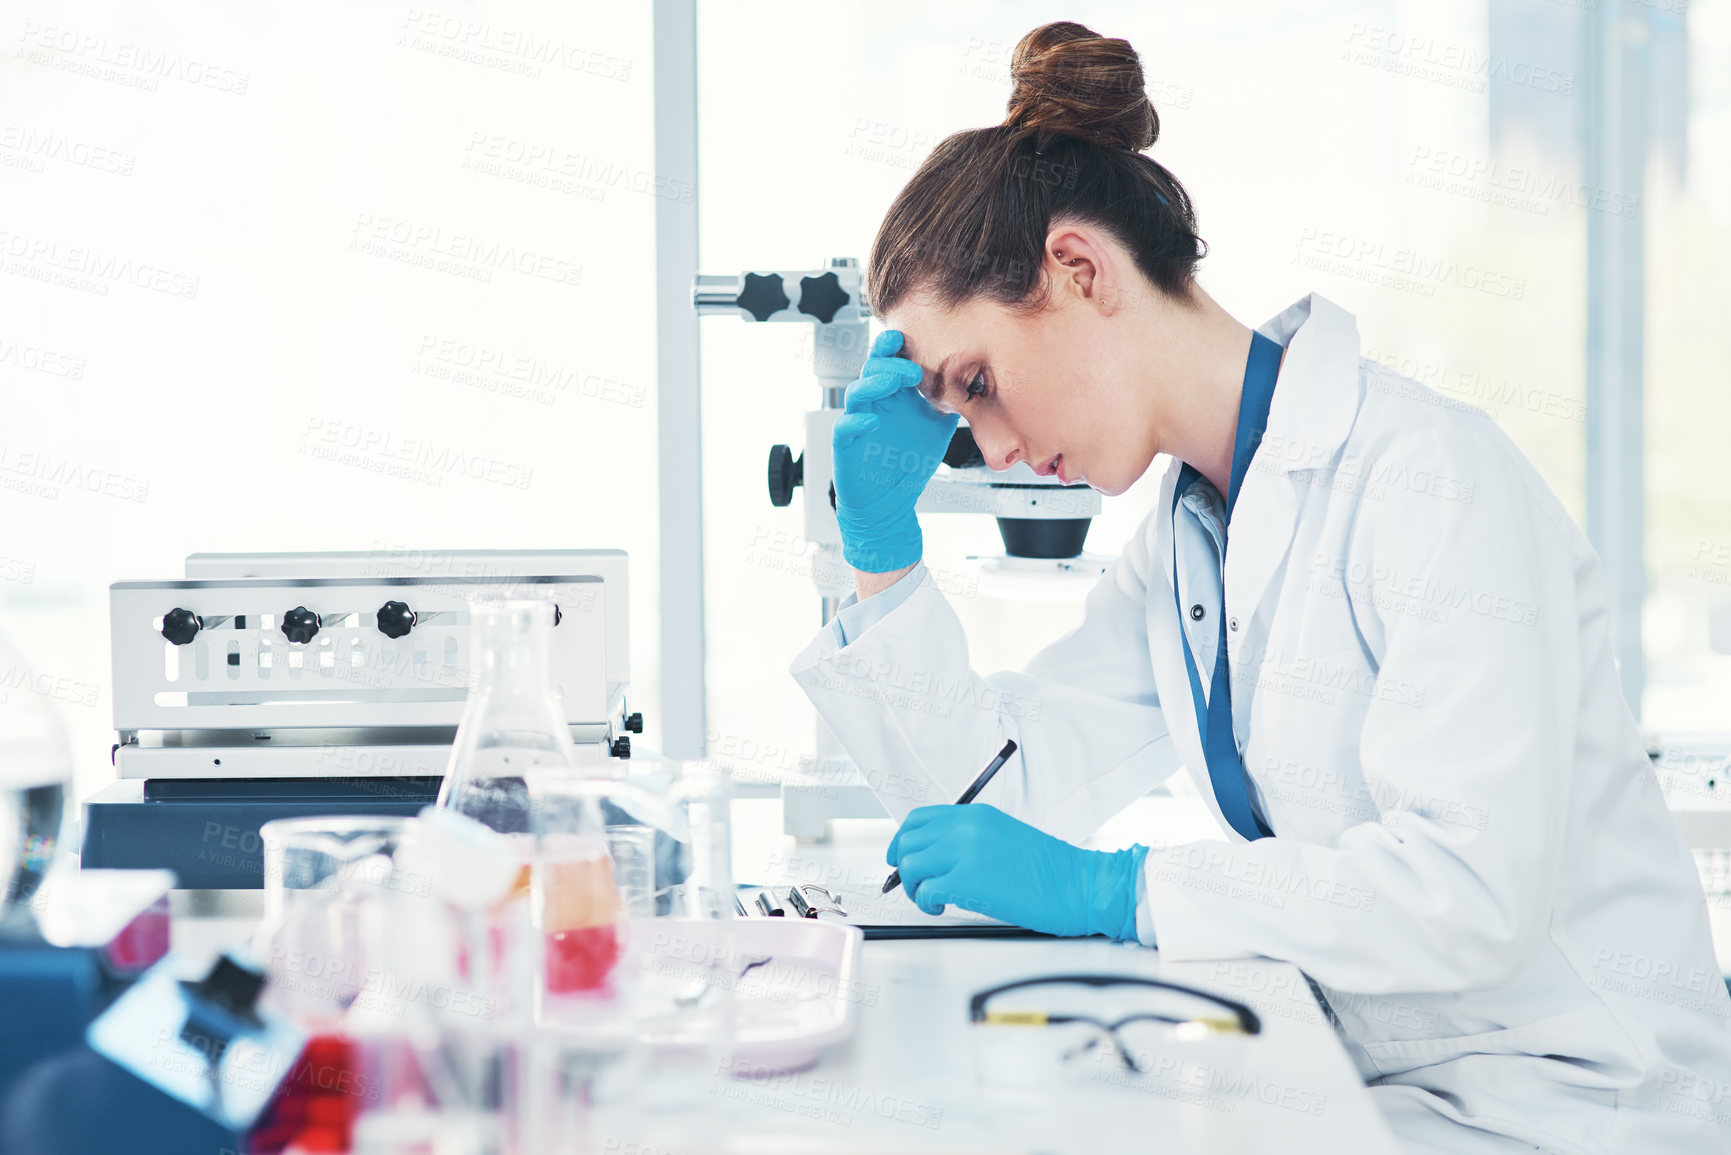 Buy stock photo Cropped shot of a tired young female scientist making notes while conducting experiments inside of a laboratory during the day